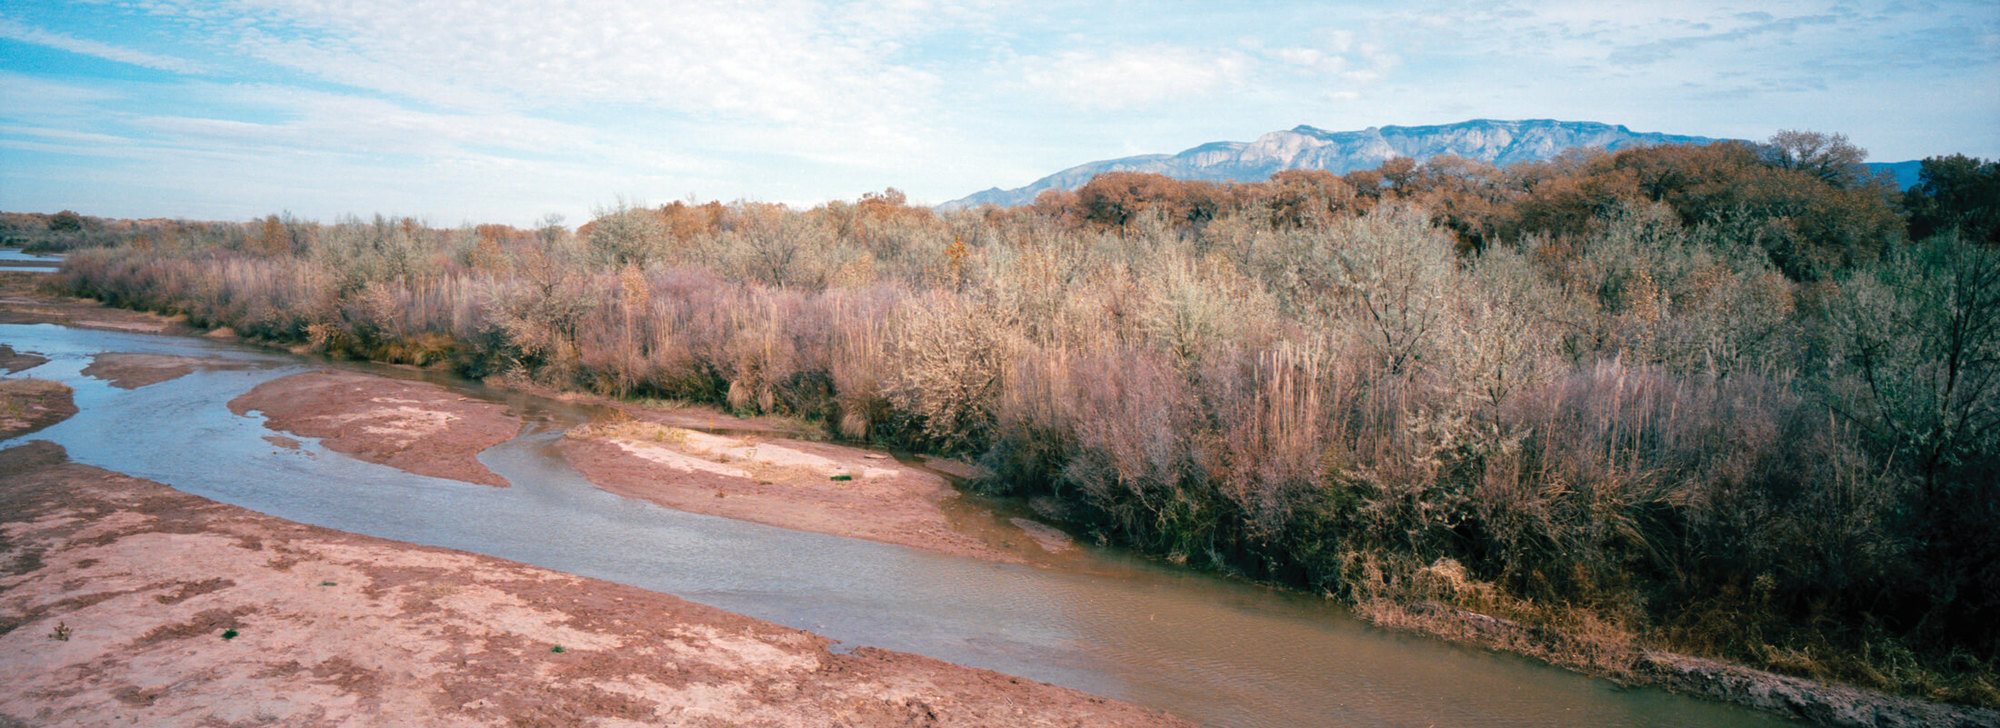 The Rio Grande as seen from Albuquerque, New Mexico, in the Middle Rio Grande region. Quantifying water rights through litigation or settlement is a lengthy process, one that could easily outlast our lifetime, according to Richard Hughes, an Indian law and civil litigation attorney. What it could mean, if adjudicated, is that the rights of the Middle Rio Grande pueblos would finally be defined — inarguably — as superior to non-Native entities and governments. “It would completely turn the whole water-rights situation in the basin on its head,” Hughes said.